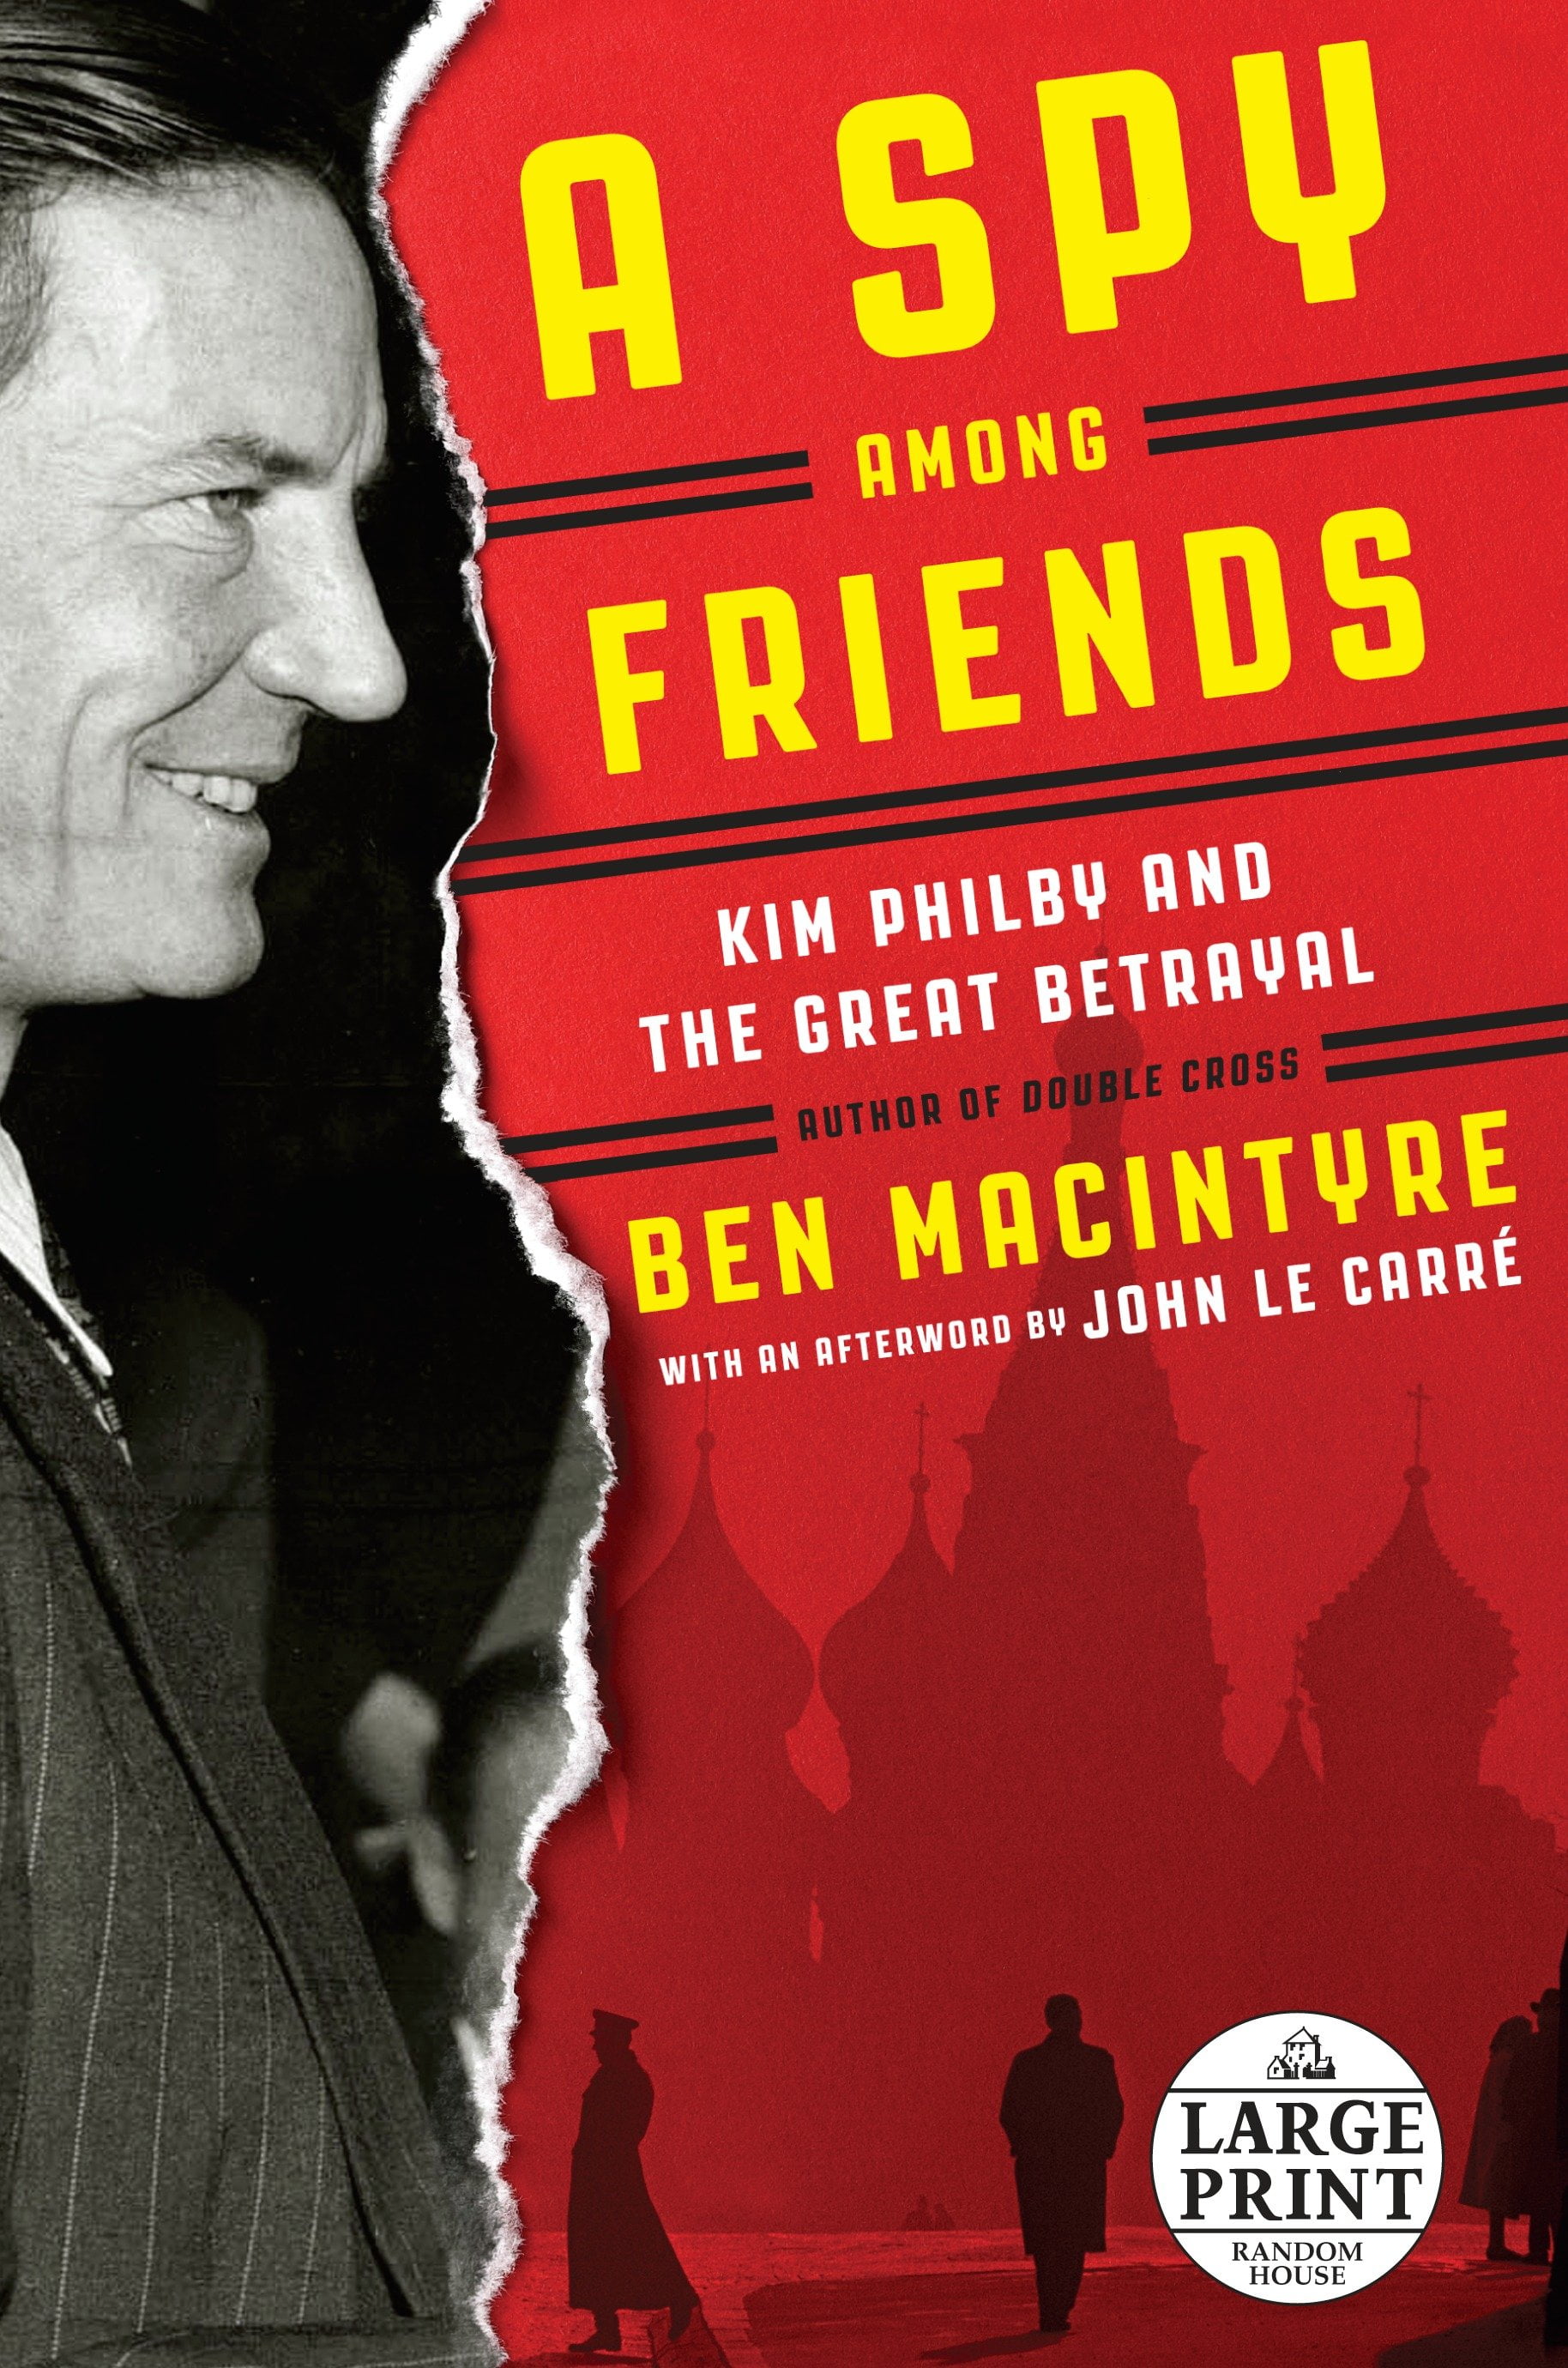 book review a spy among friends